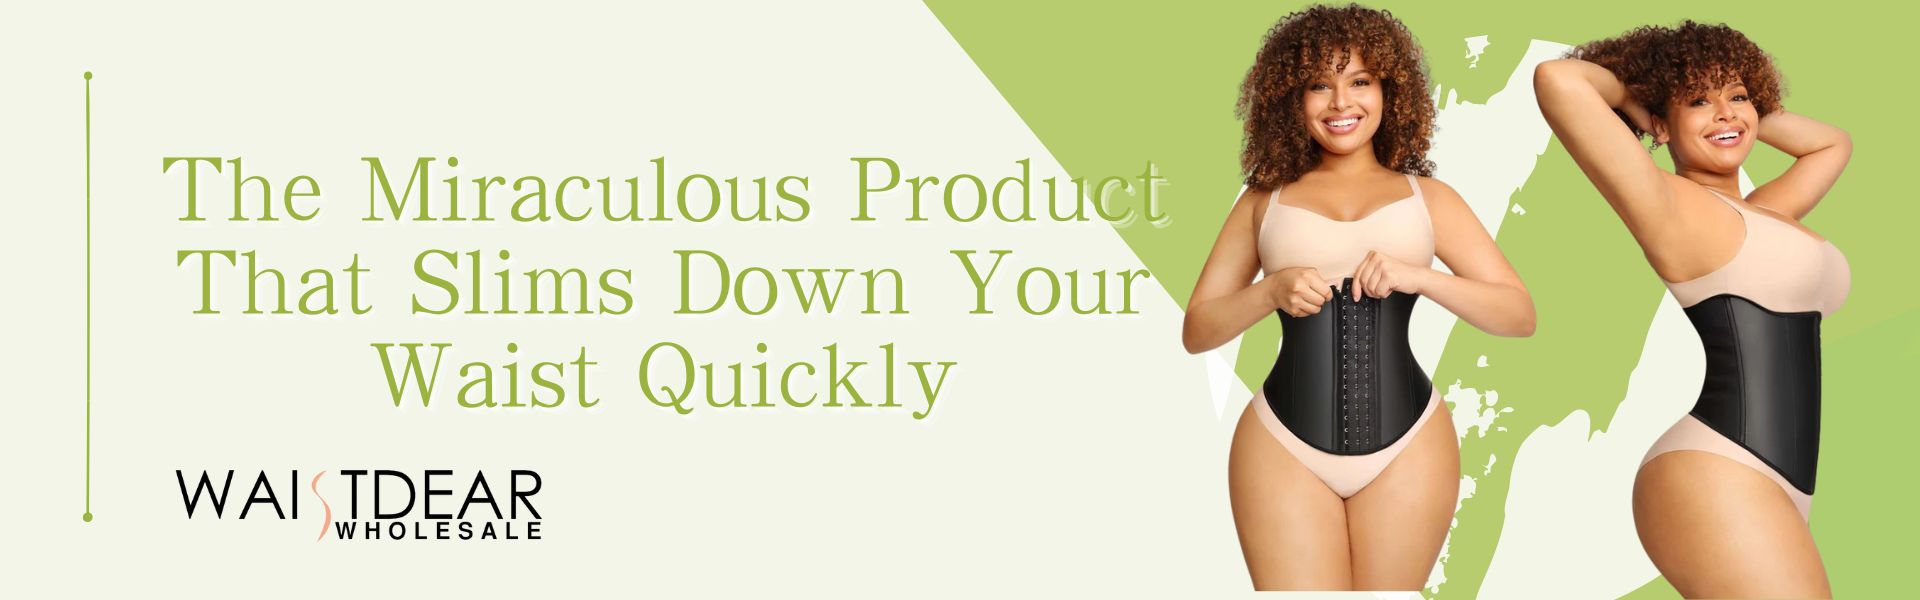 The Miraculous Product That Slims Down Your Waist Quickly